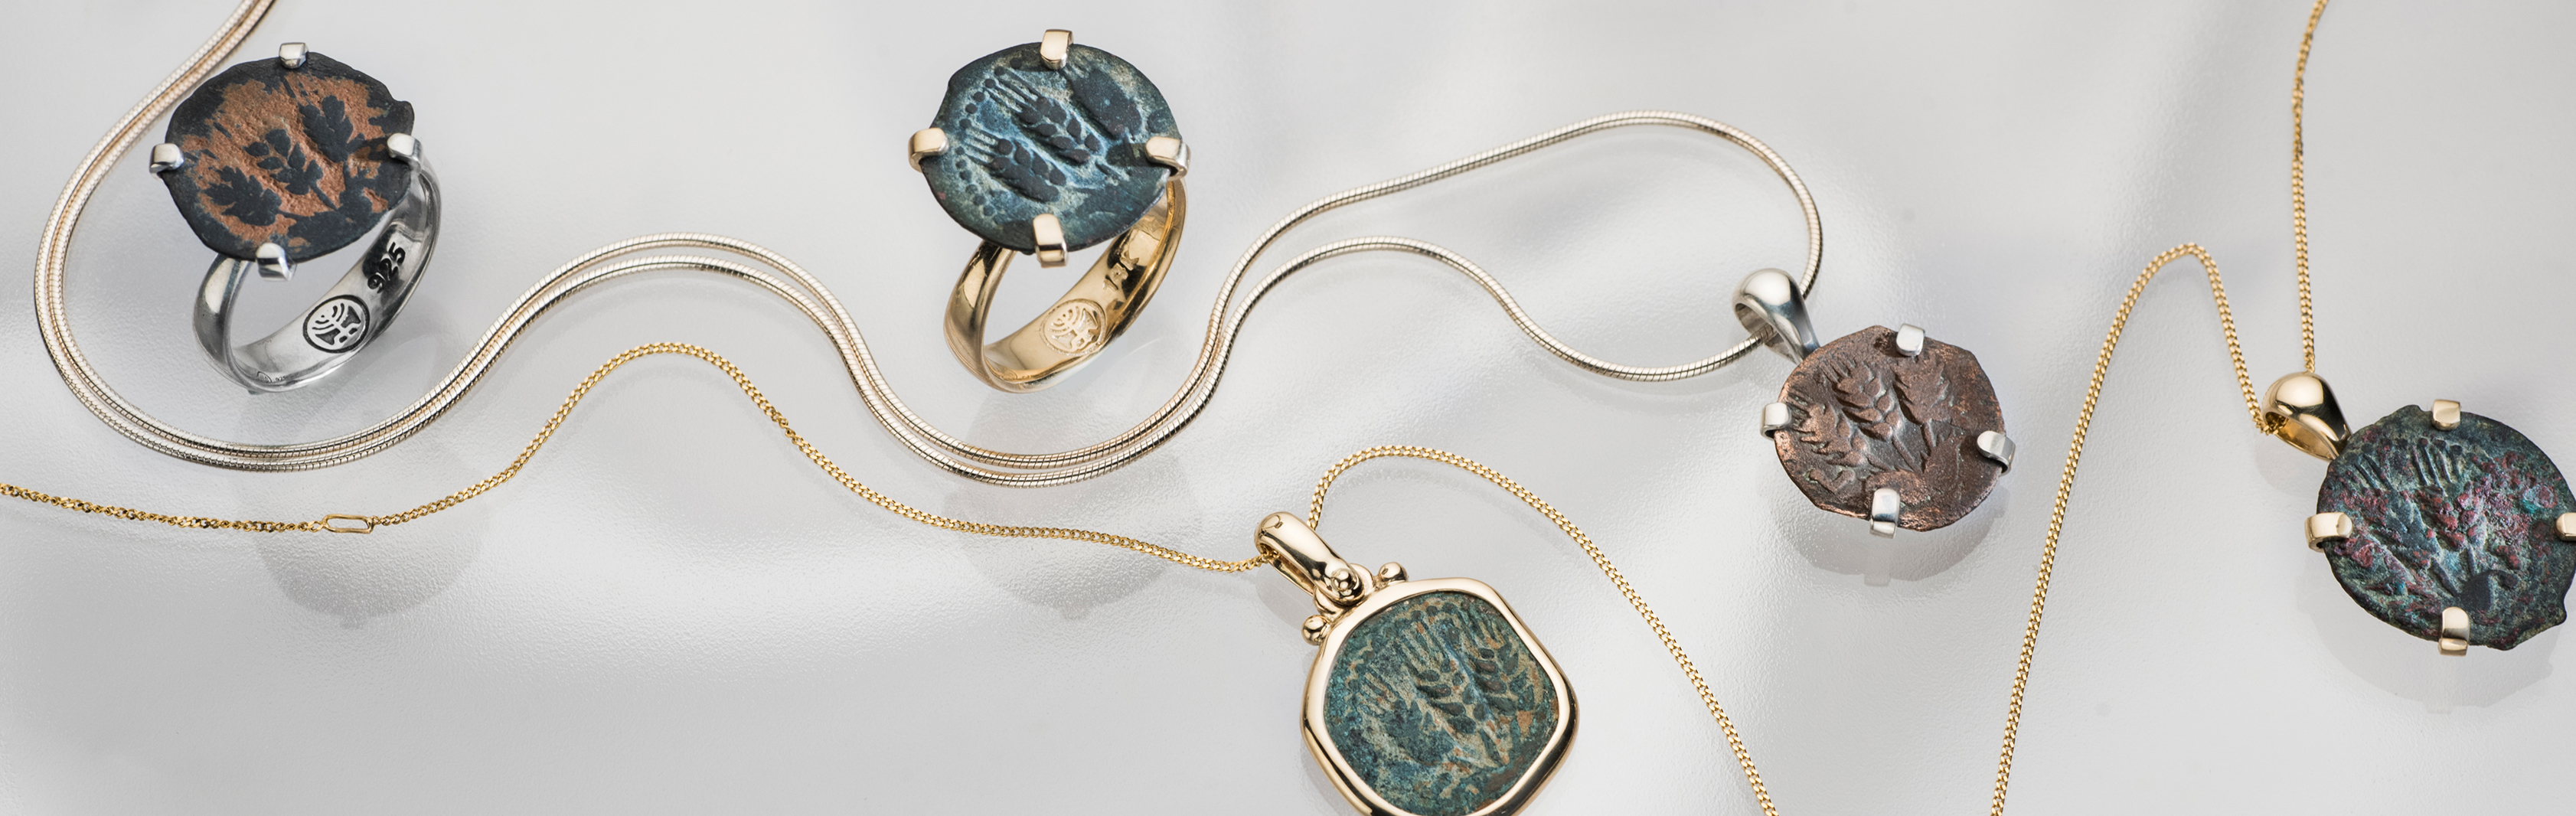 Ancient Coin Jewelry Collection | 925 Sterling Silver & Gold Jewelry with Antique Coins